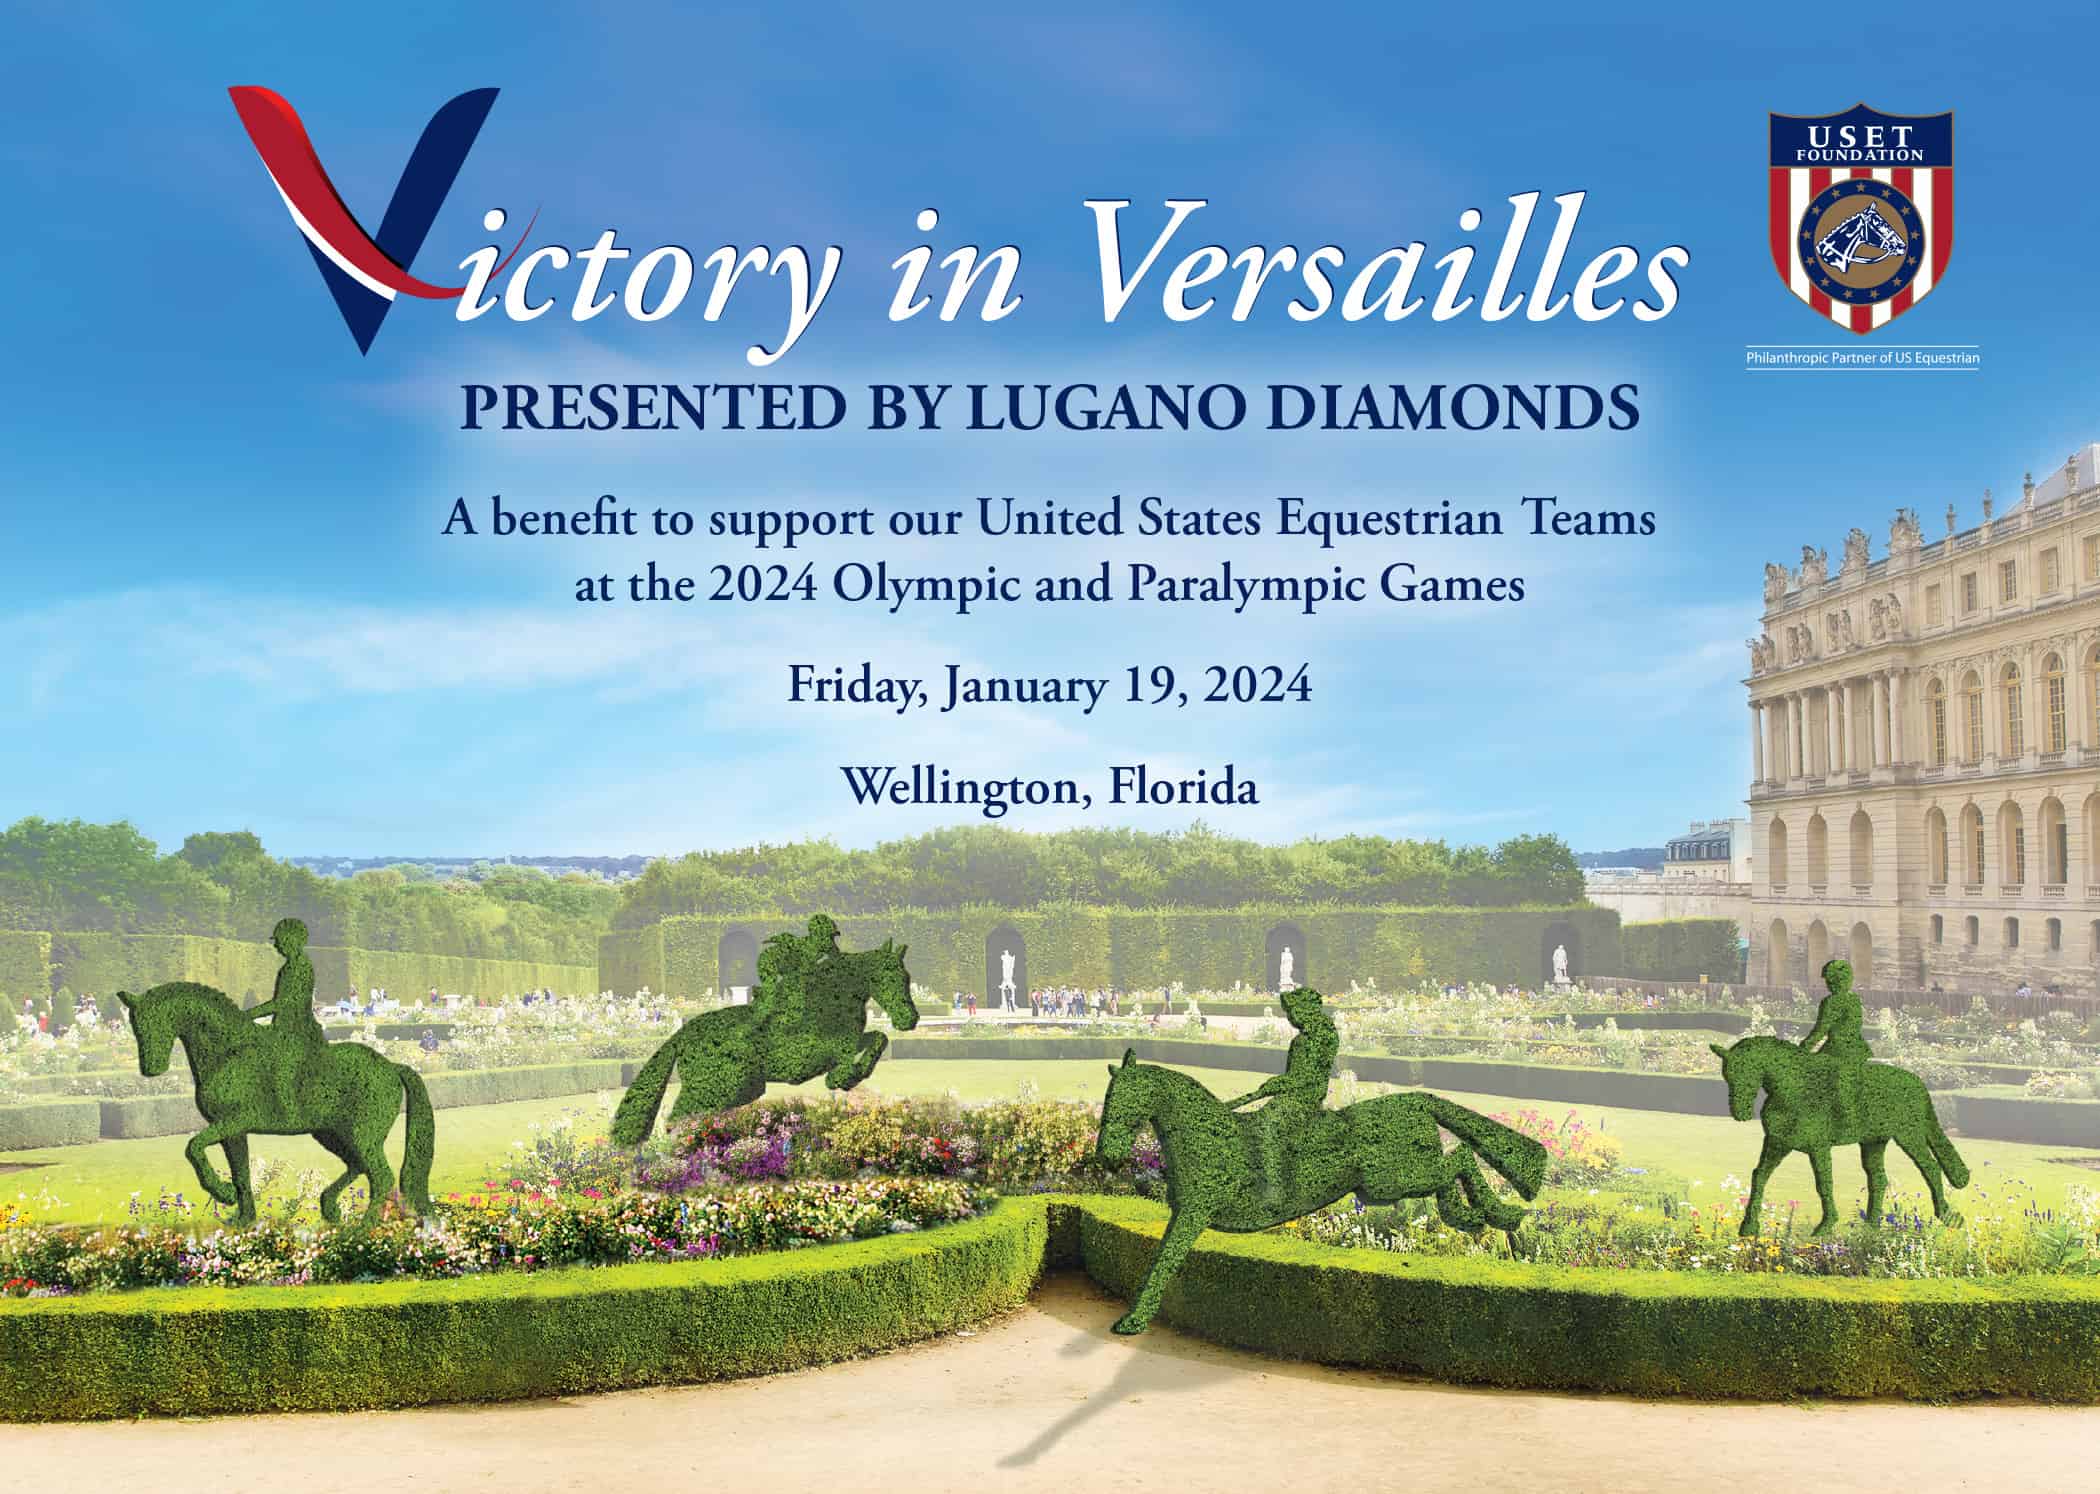 united states equestrian team 2024 olympics paralympic games victory in versailles